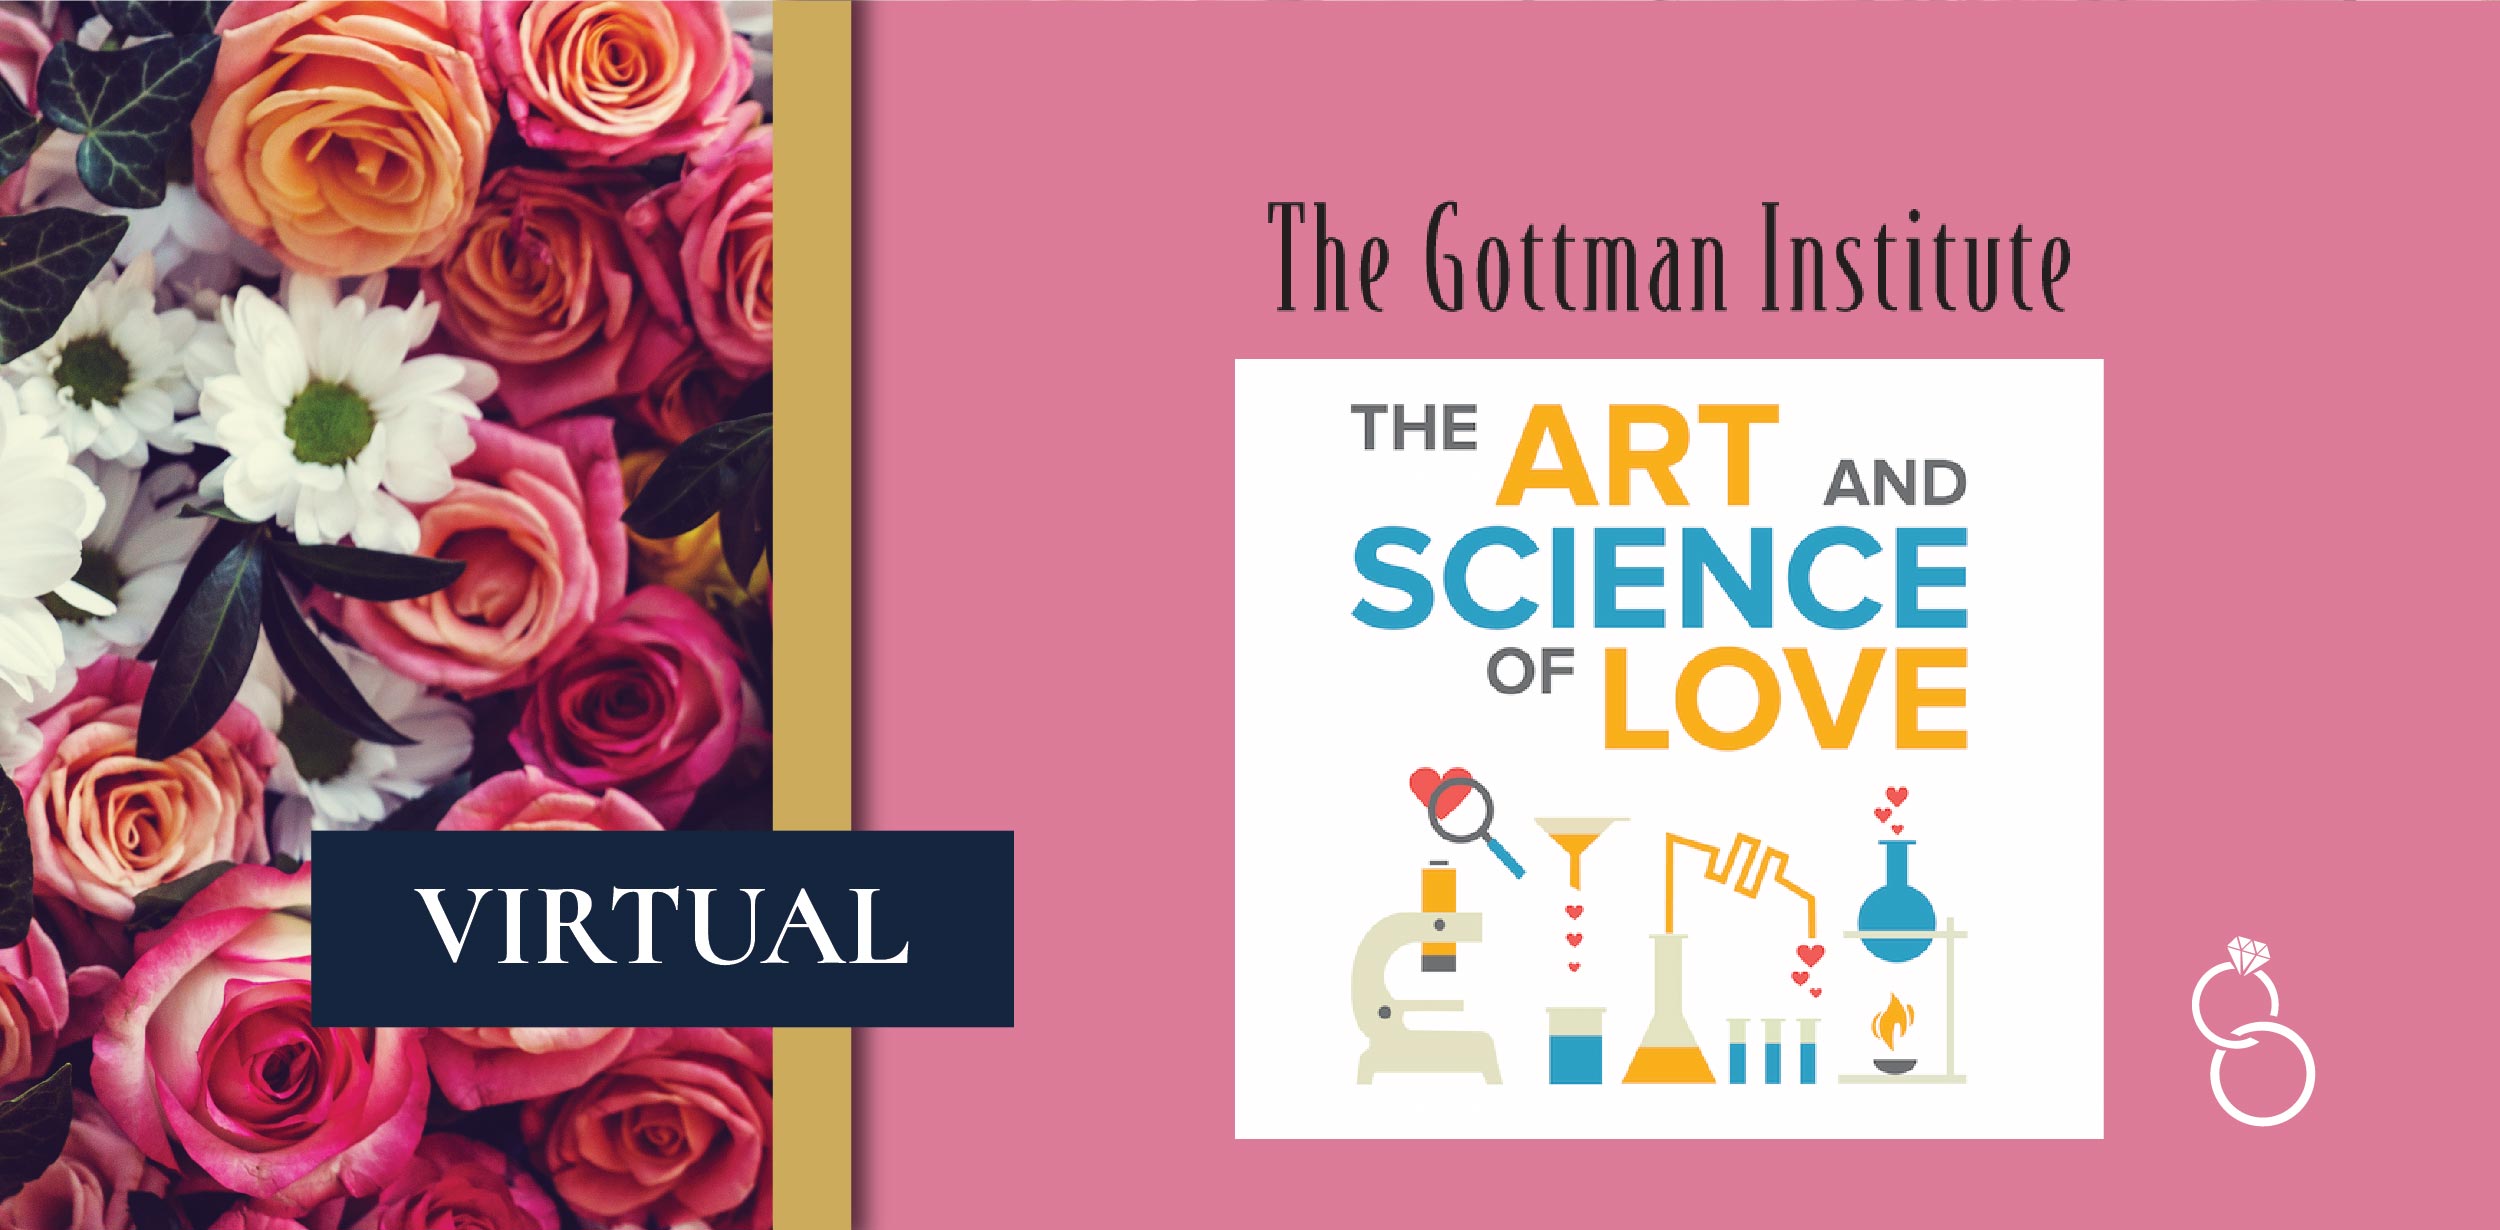 Moderated The Art And Science Of Love Online May June 2021 Dr John Crossen